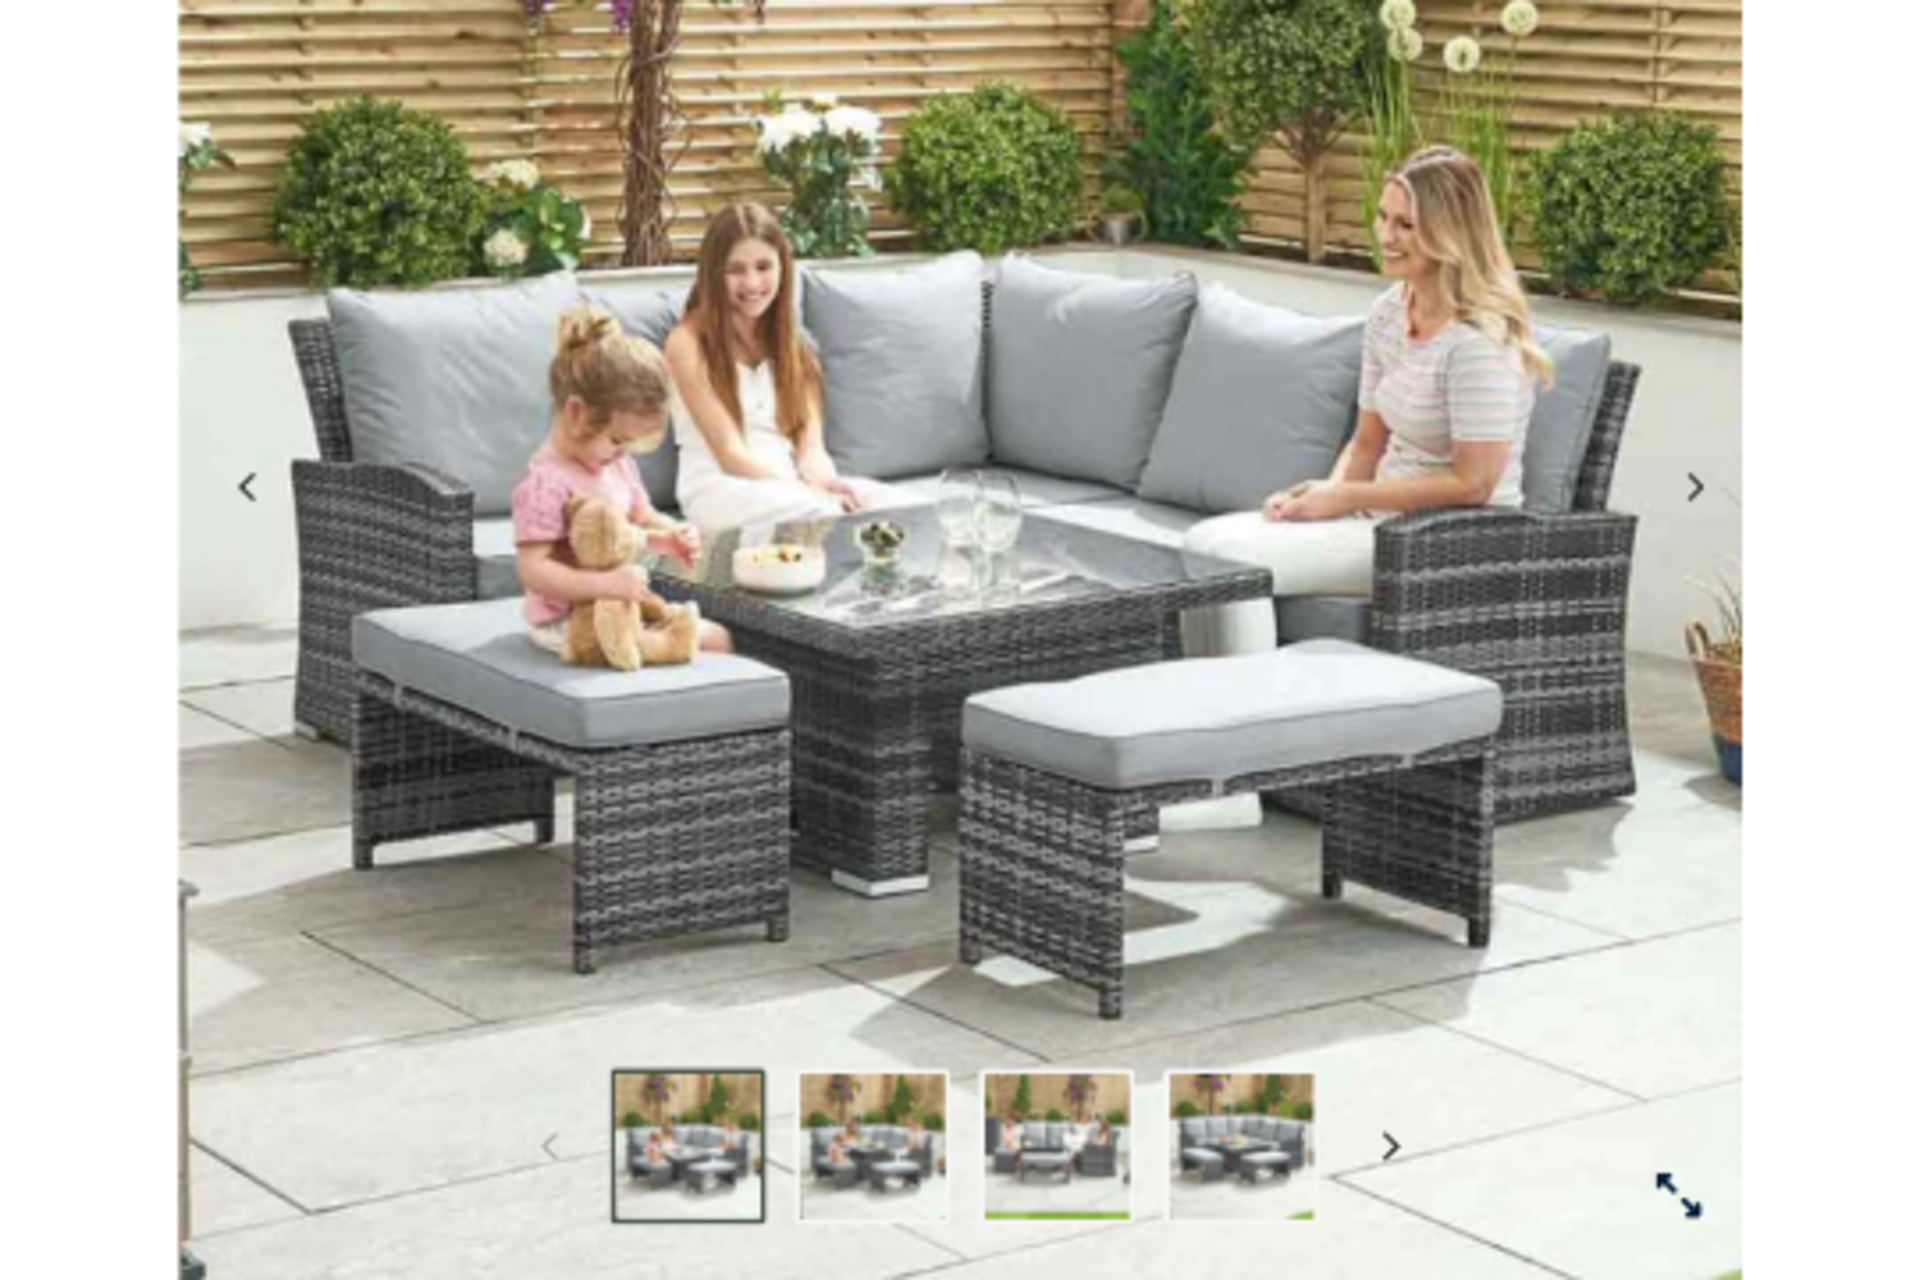 New & Boxed Nova Garden Furniture Cambridge Brown Weave Compact Corner Dining Set with Rising - Image 2 of 3